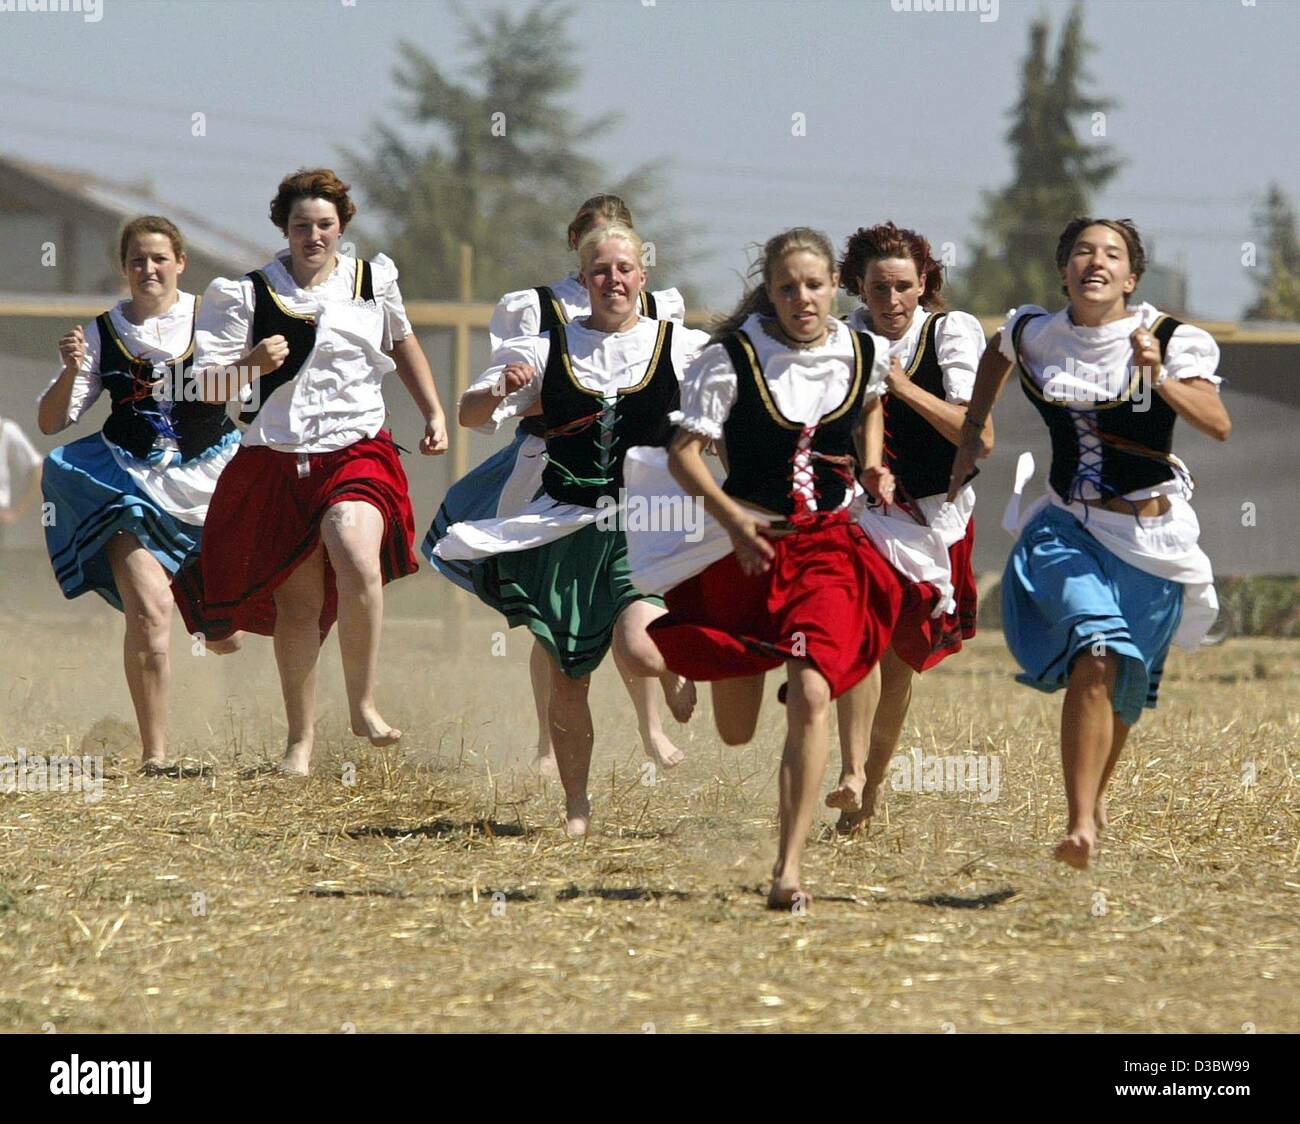 (dpa) - 15-year-old Elke Nagel (2nd from R) wins the traditional Sheperd's Run in Markgroeningen, southern Germany, 23 August 2003. Fifteen sheperds' daughters took part in the race: running barefoot and in traditional skirts over a 300 feet long stubble field. The shepard's run is the oldest tradit Stock Photo